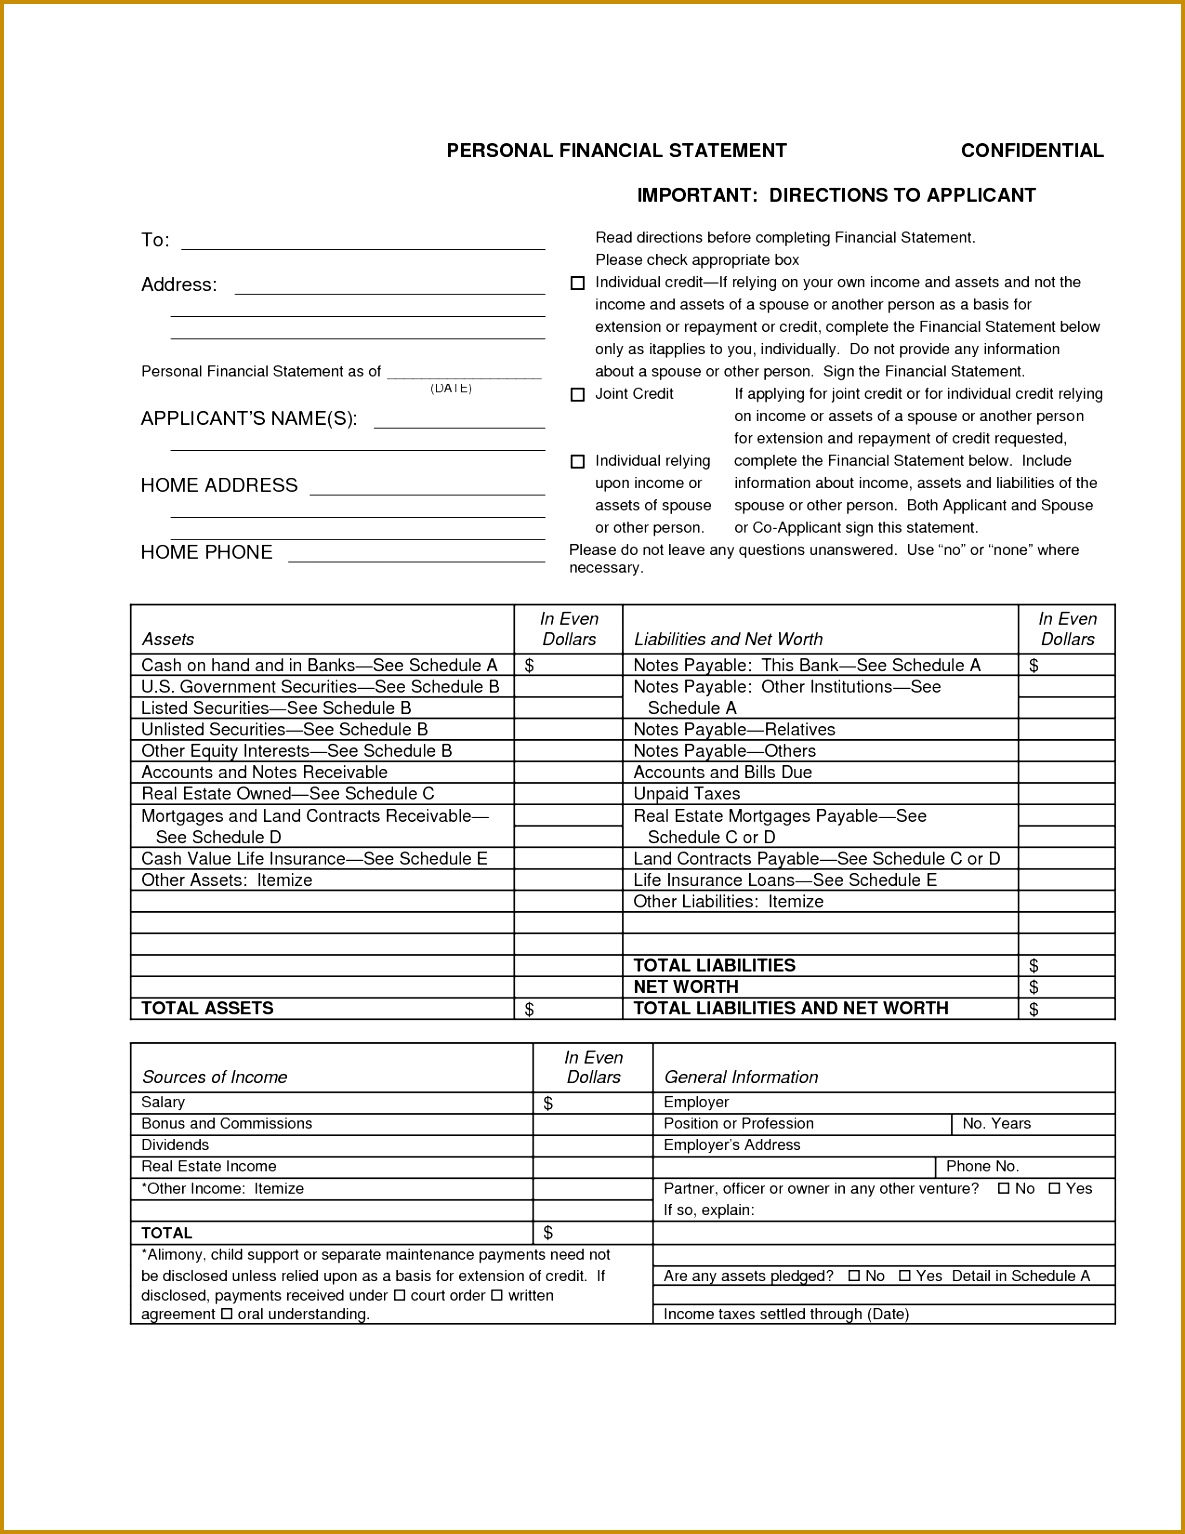 business financial statement form business financial statement form business financial statement example business financial statement form business in e statement 11851534